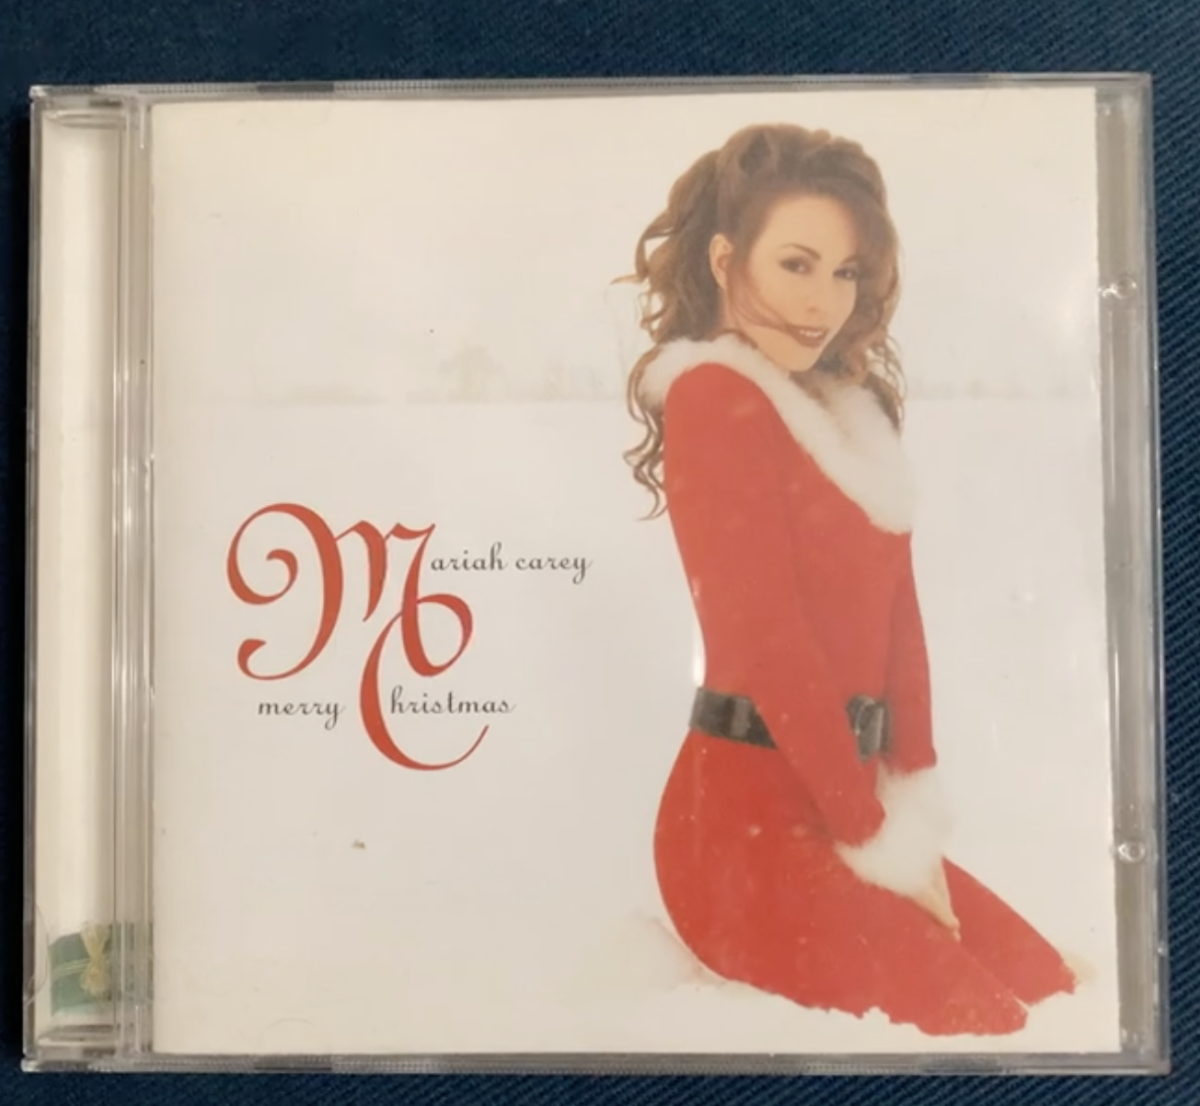 Mariah Careys Christmas album is always a fan favorite during the holidays.